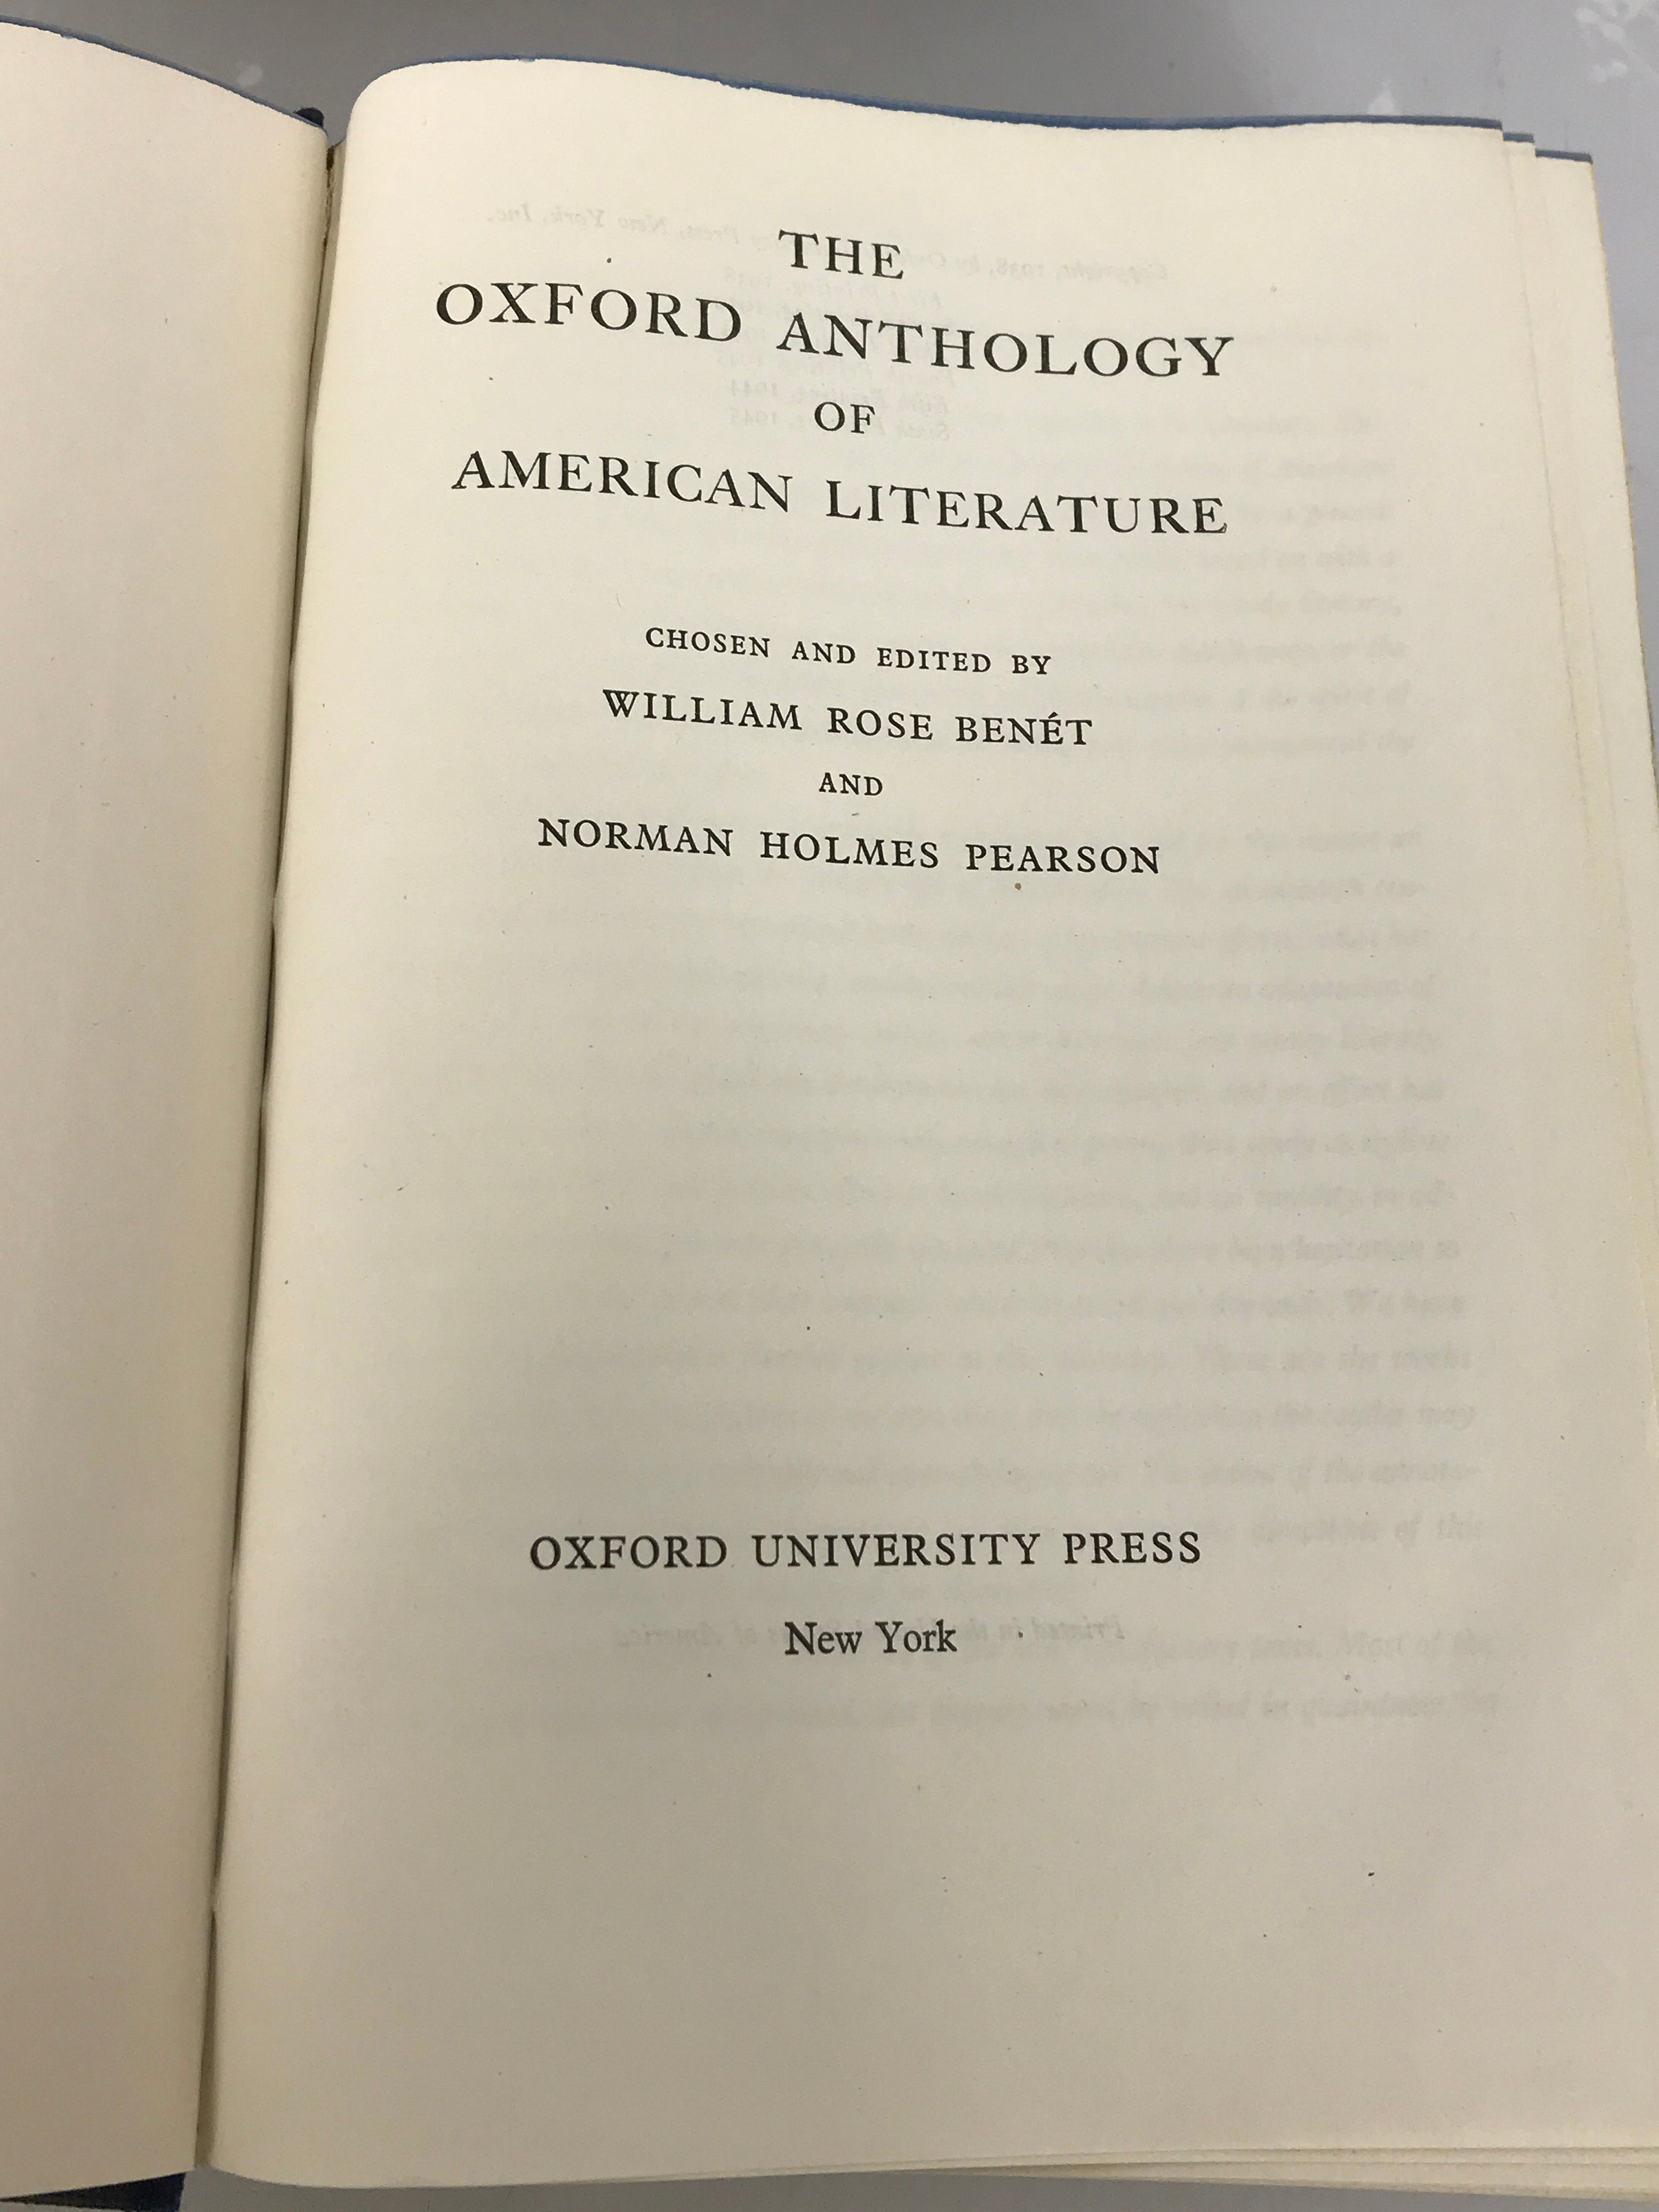 The Oxford Anthology of American Literature Benet and Pearson 1945 Sixth Printing HC